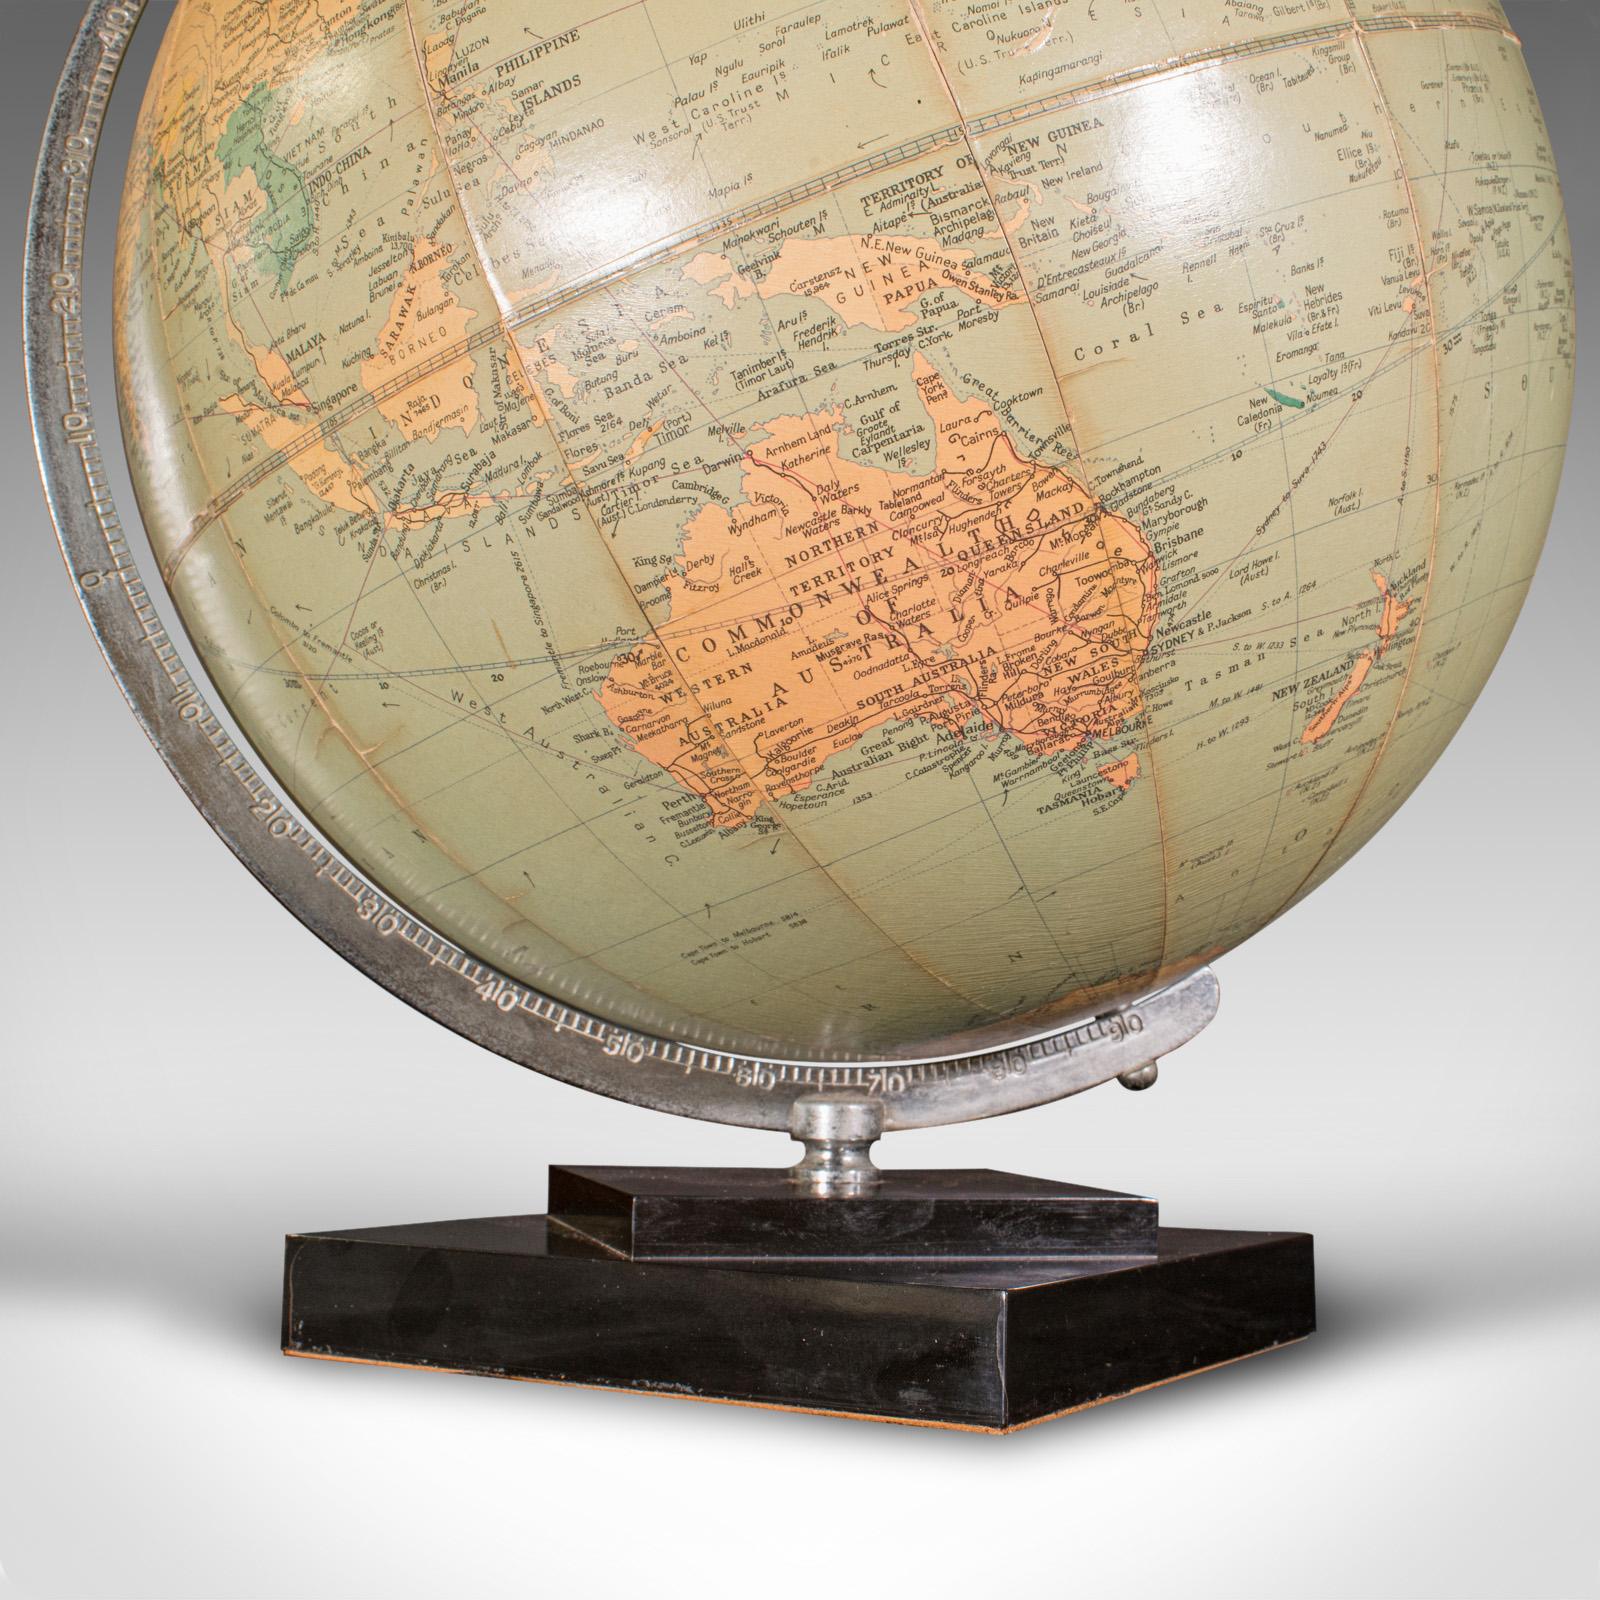 Chrome Vintage Table Globe, English, World Map, 13.5 Inch Diameter, Cartography, C.1960 For Sale